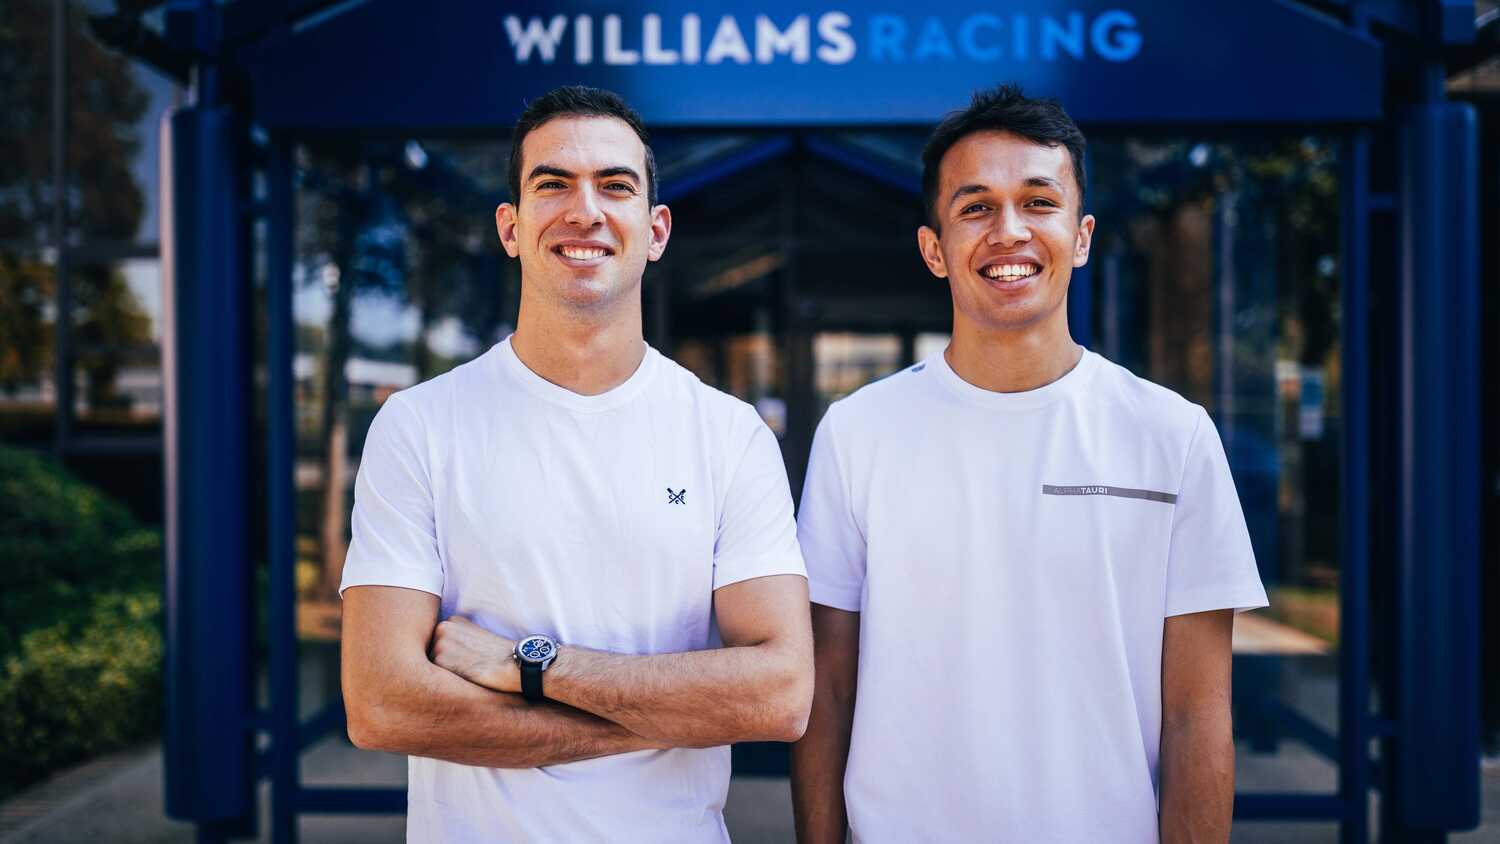 On his first day at Williams, Albon has a humorous mishap 